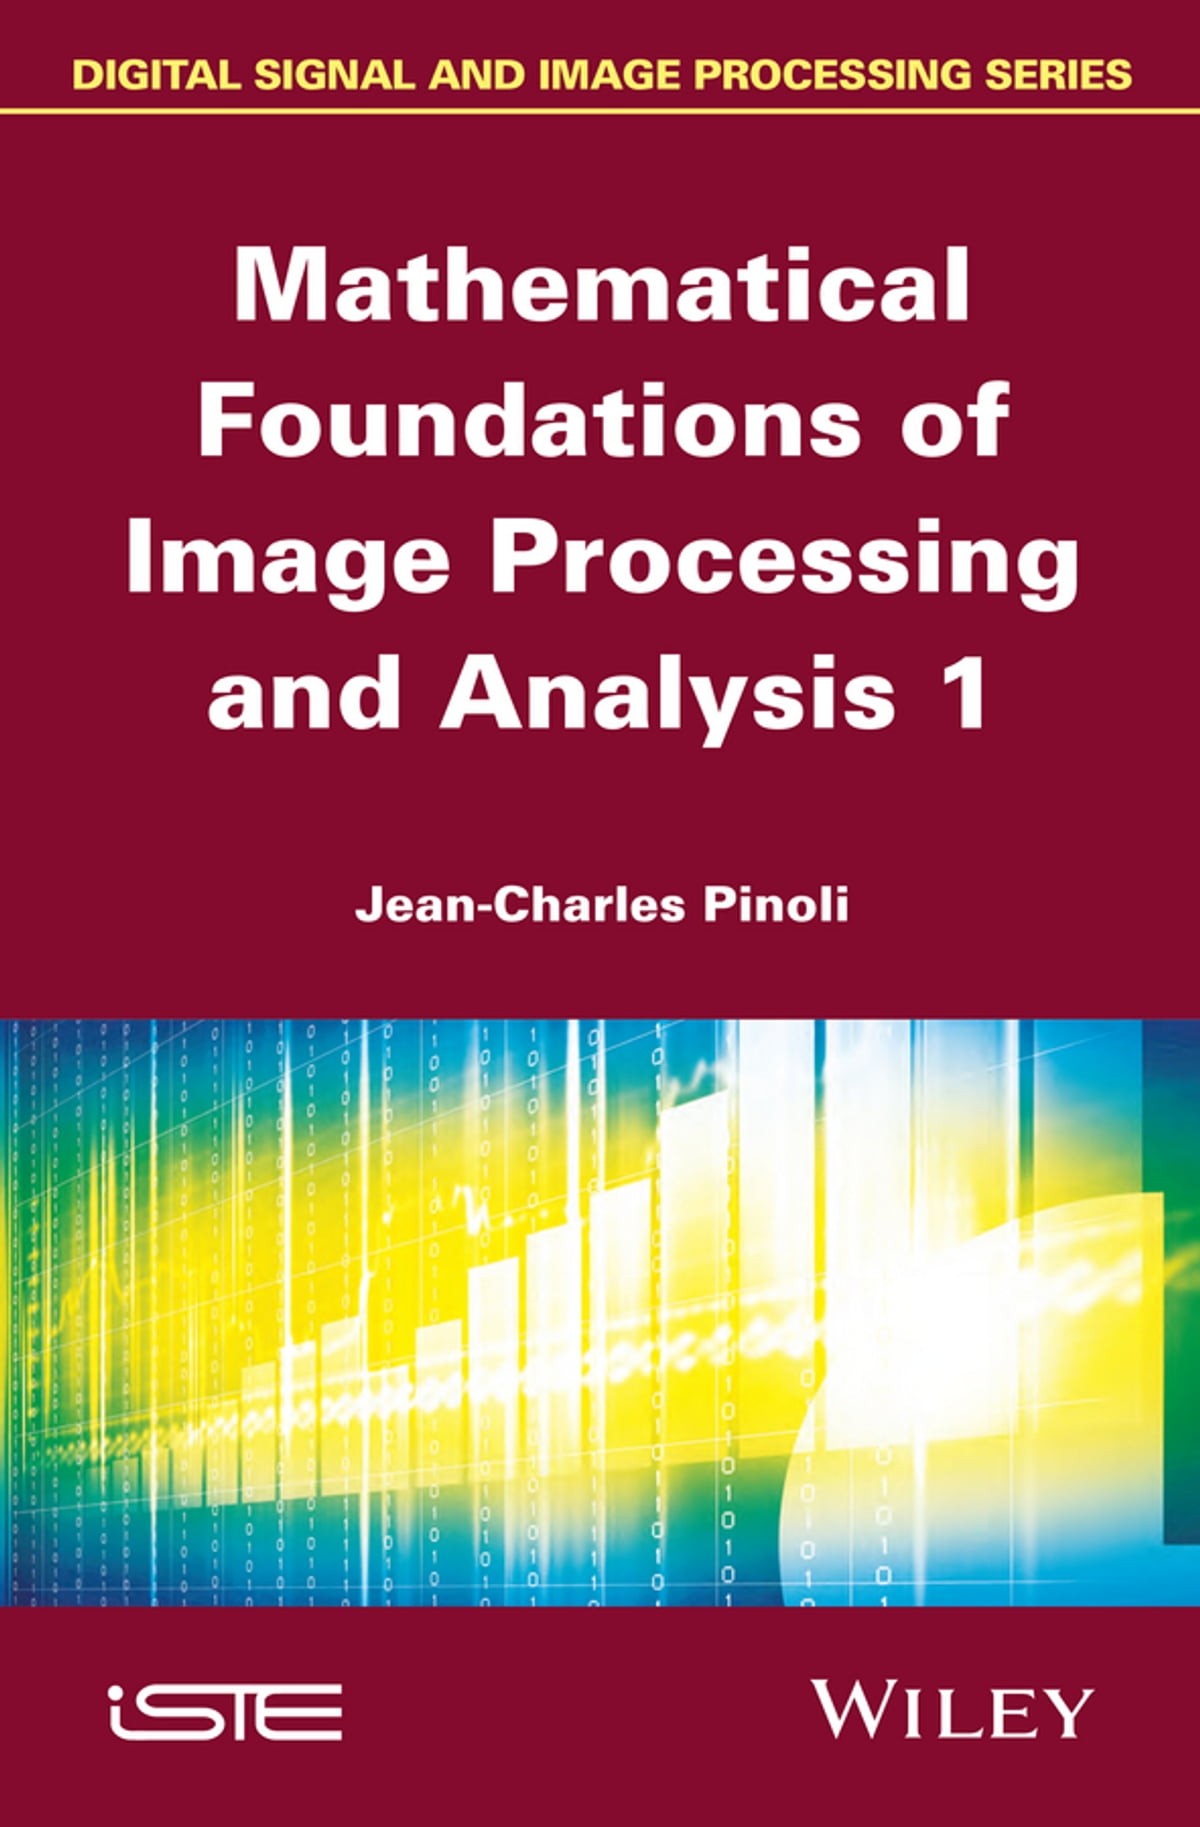 Mathematical Foundations of Image Processing and Analysis - Volume 1